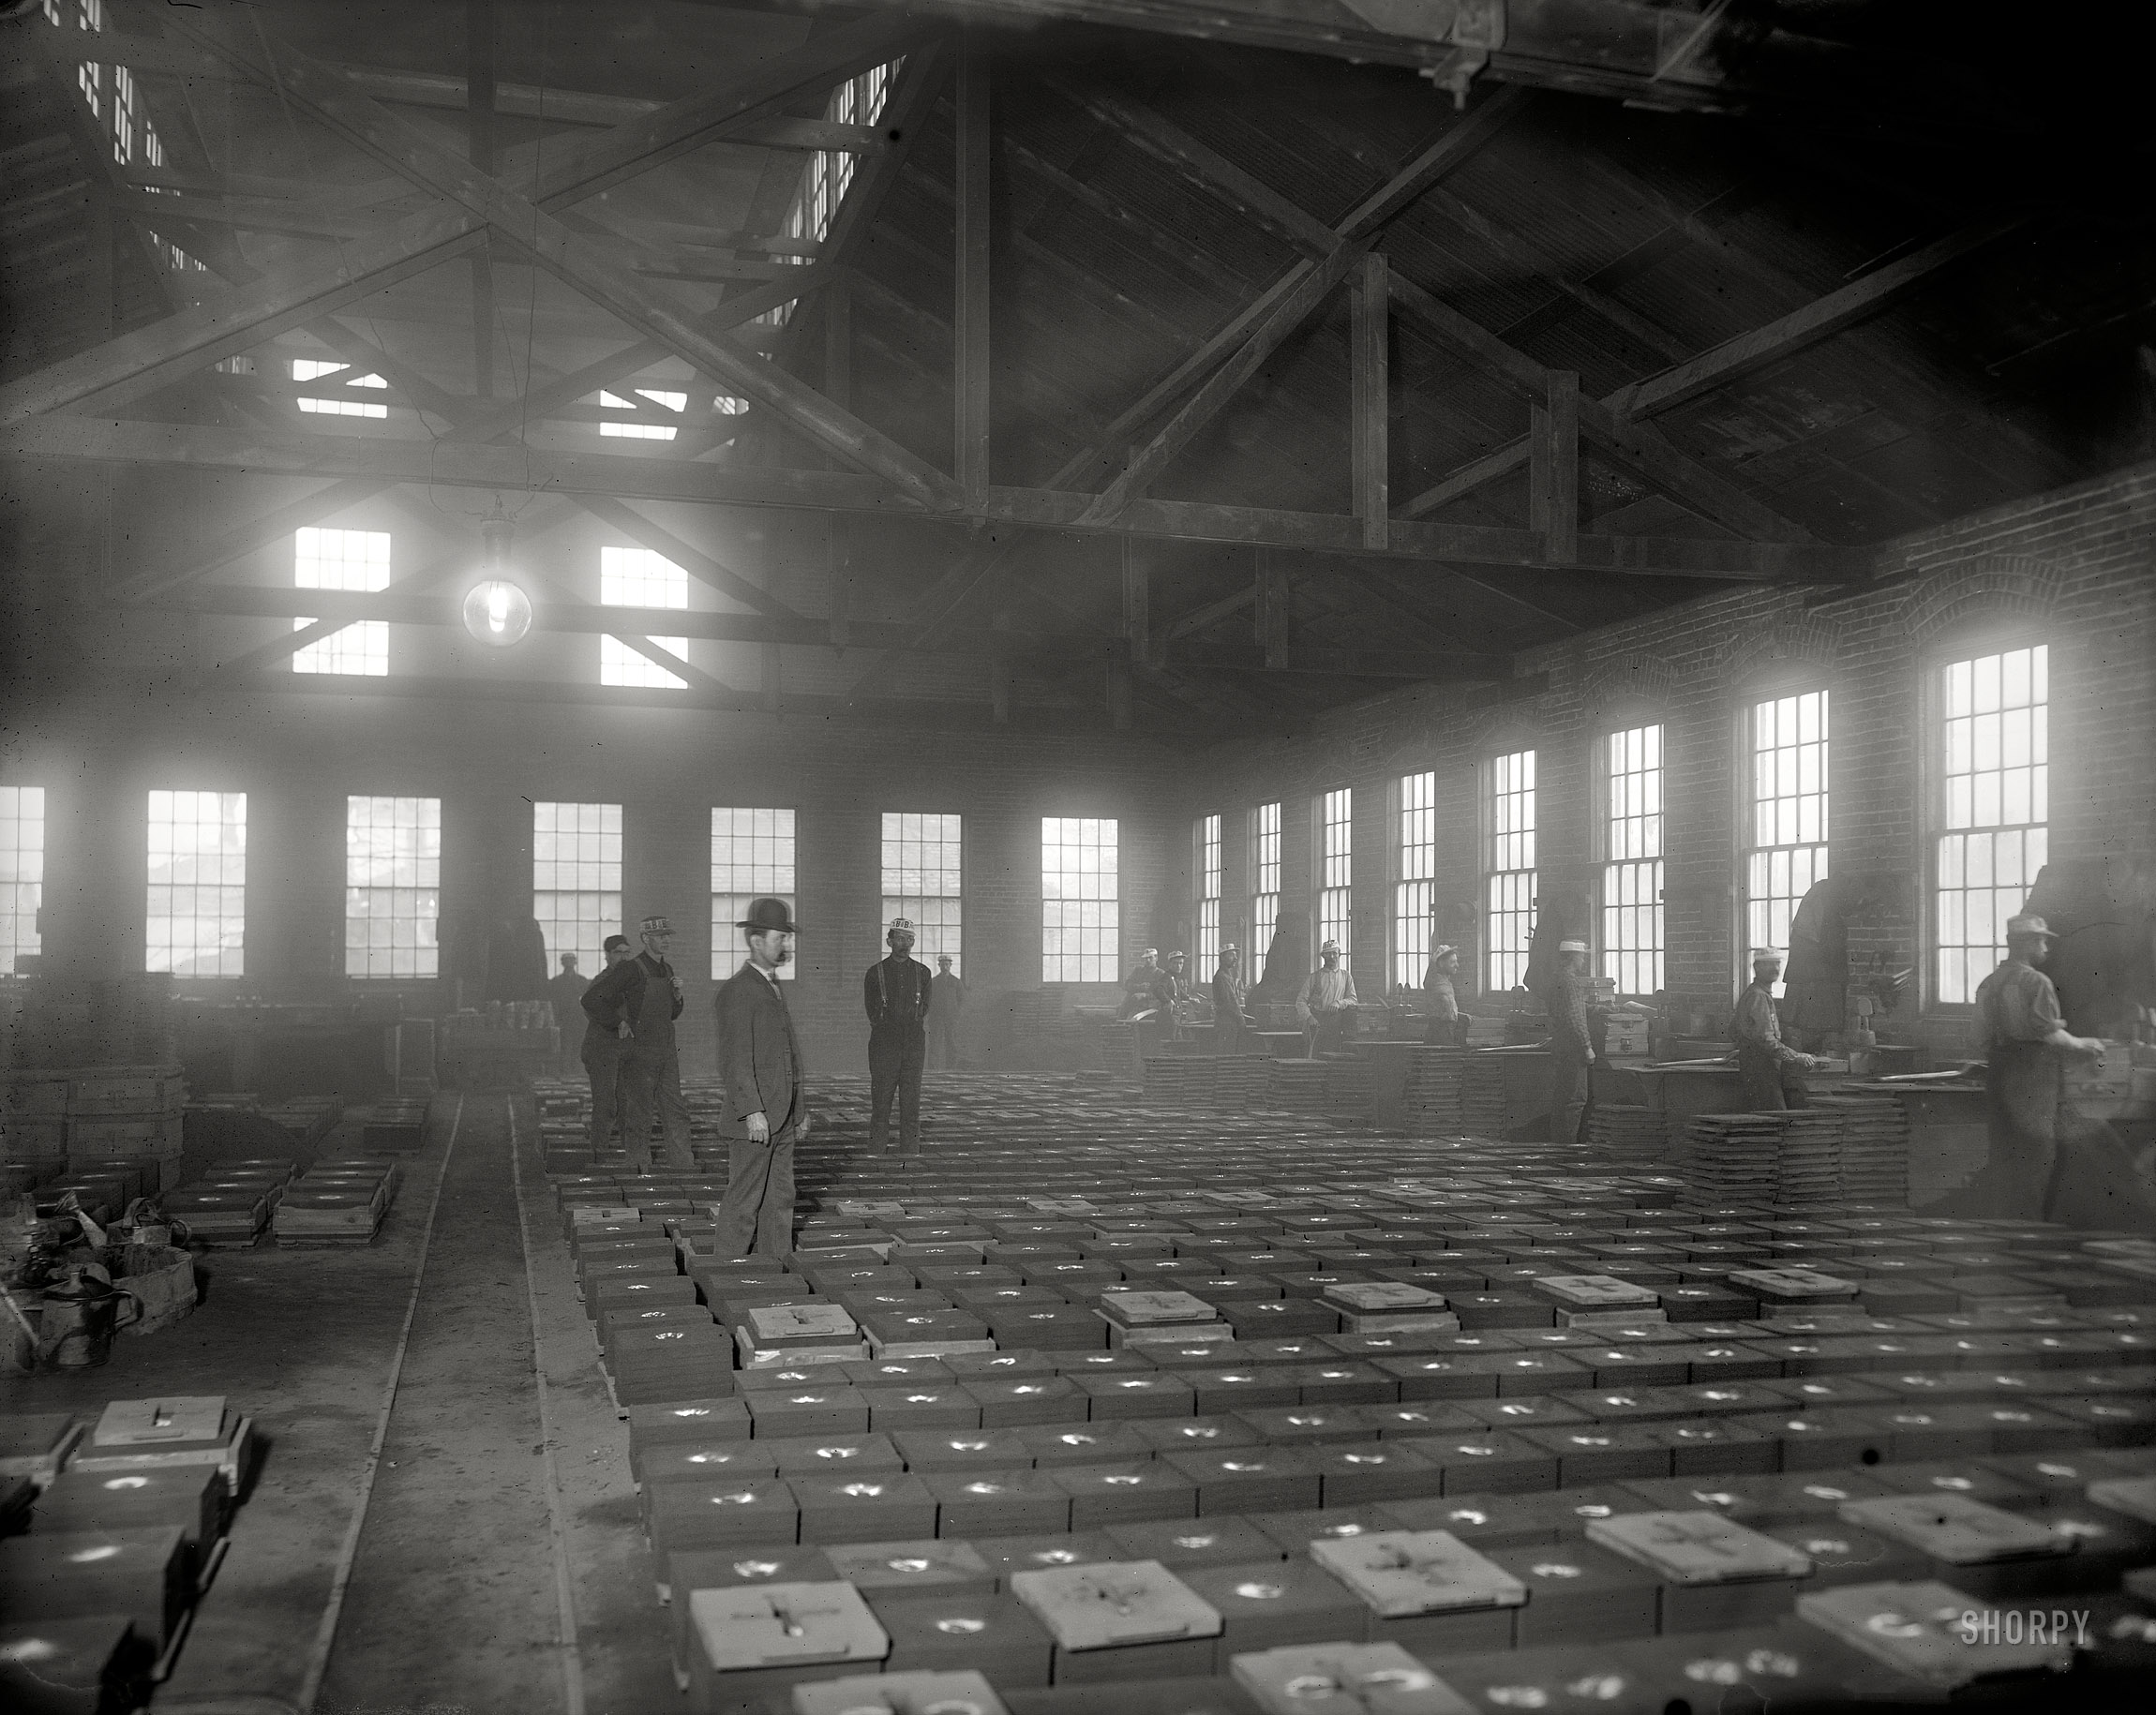 Chelsea, Michigan, circa 1901. "Glazier Stove Company molding room." No matter where Shorpy may roam, he inevitably seems to find his way back to the stove factory. 8x10 glass negative, Detroit Publishing Co. View full size.